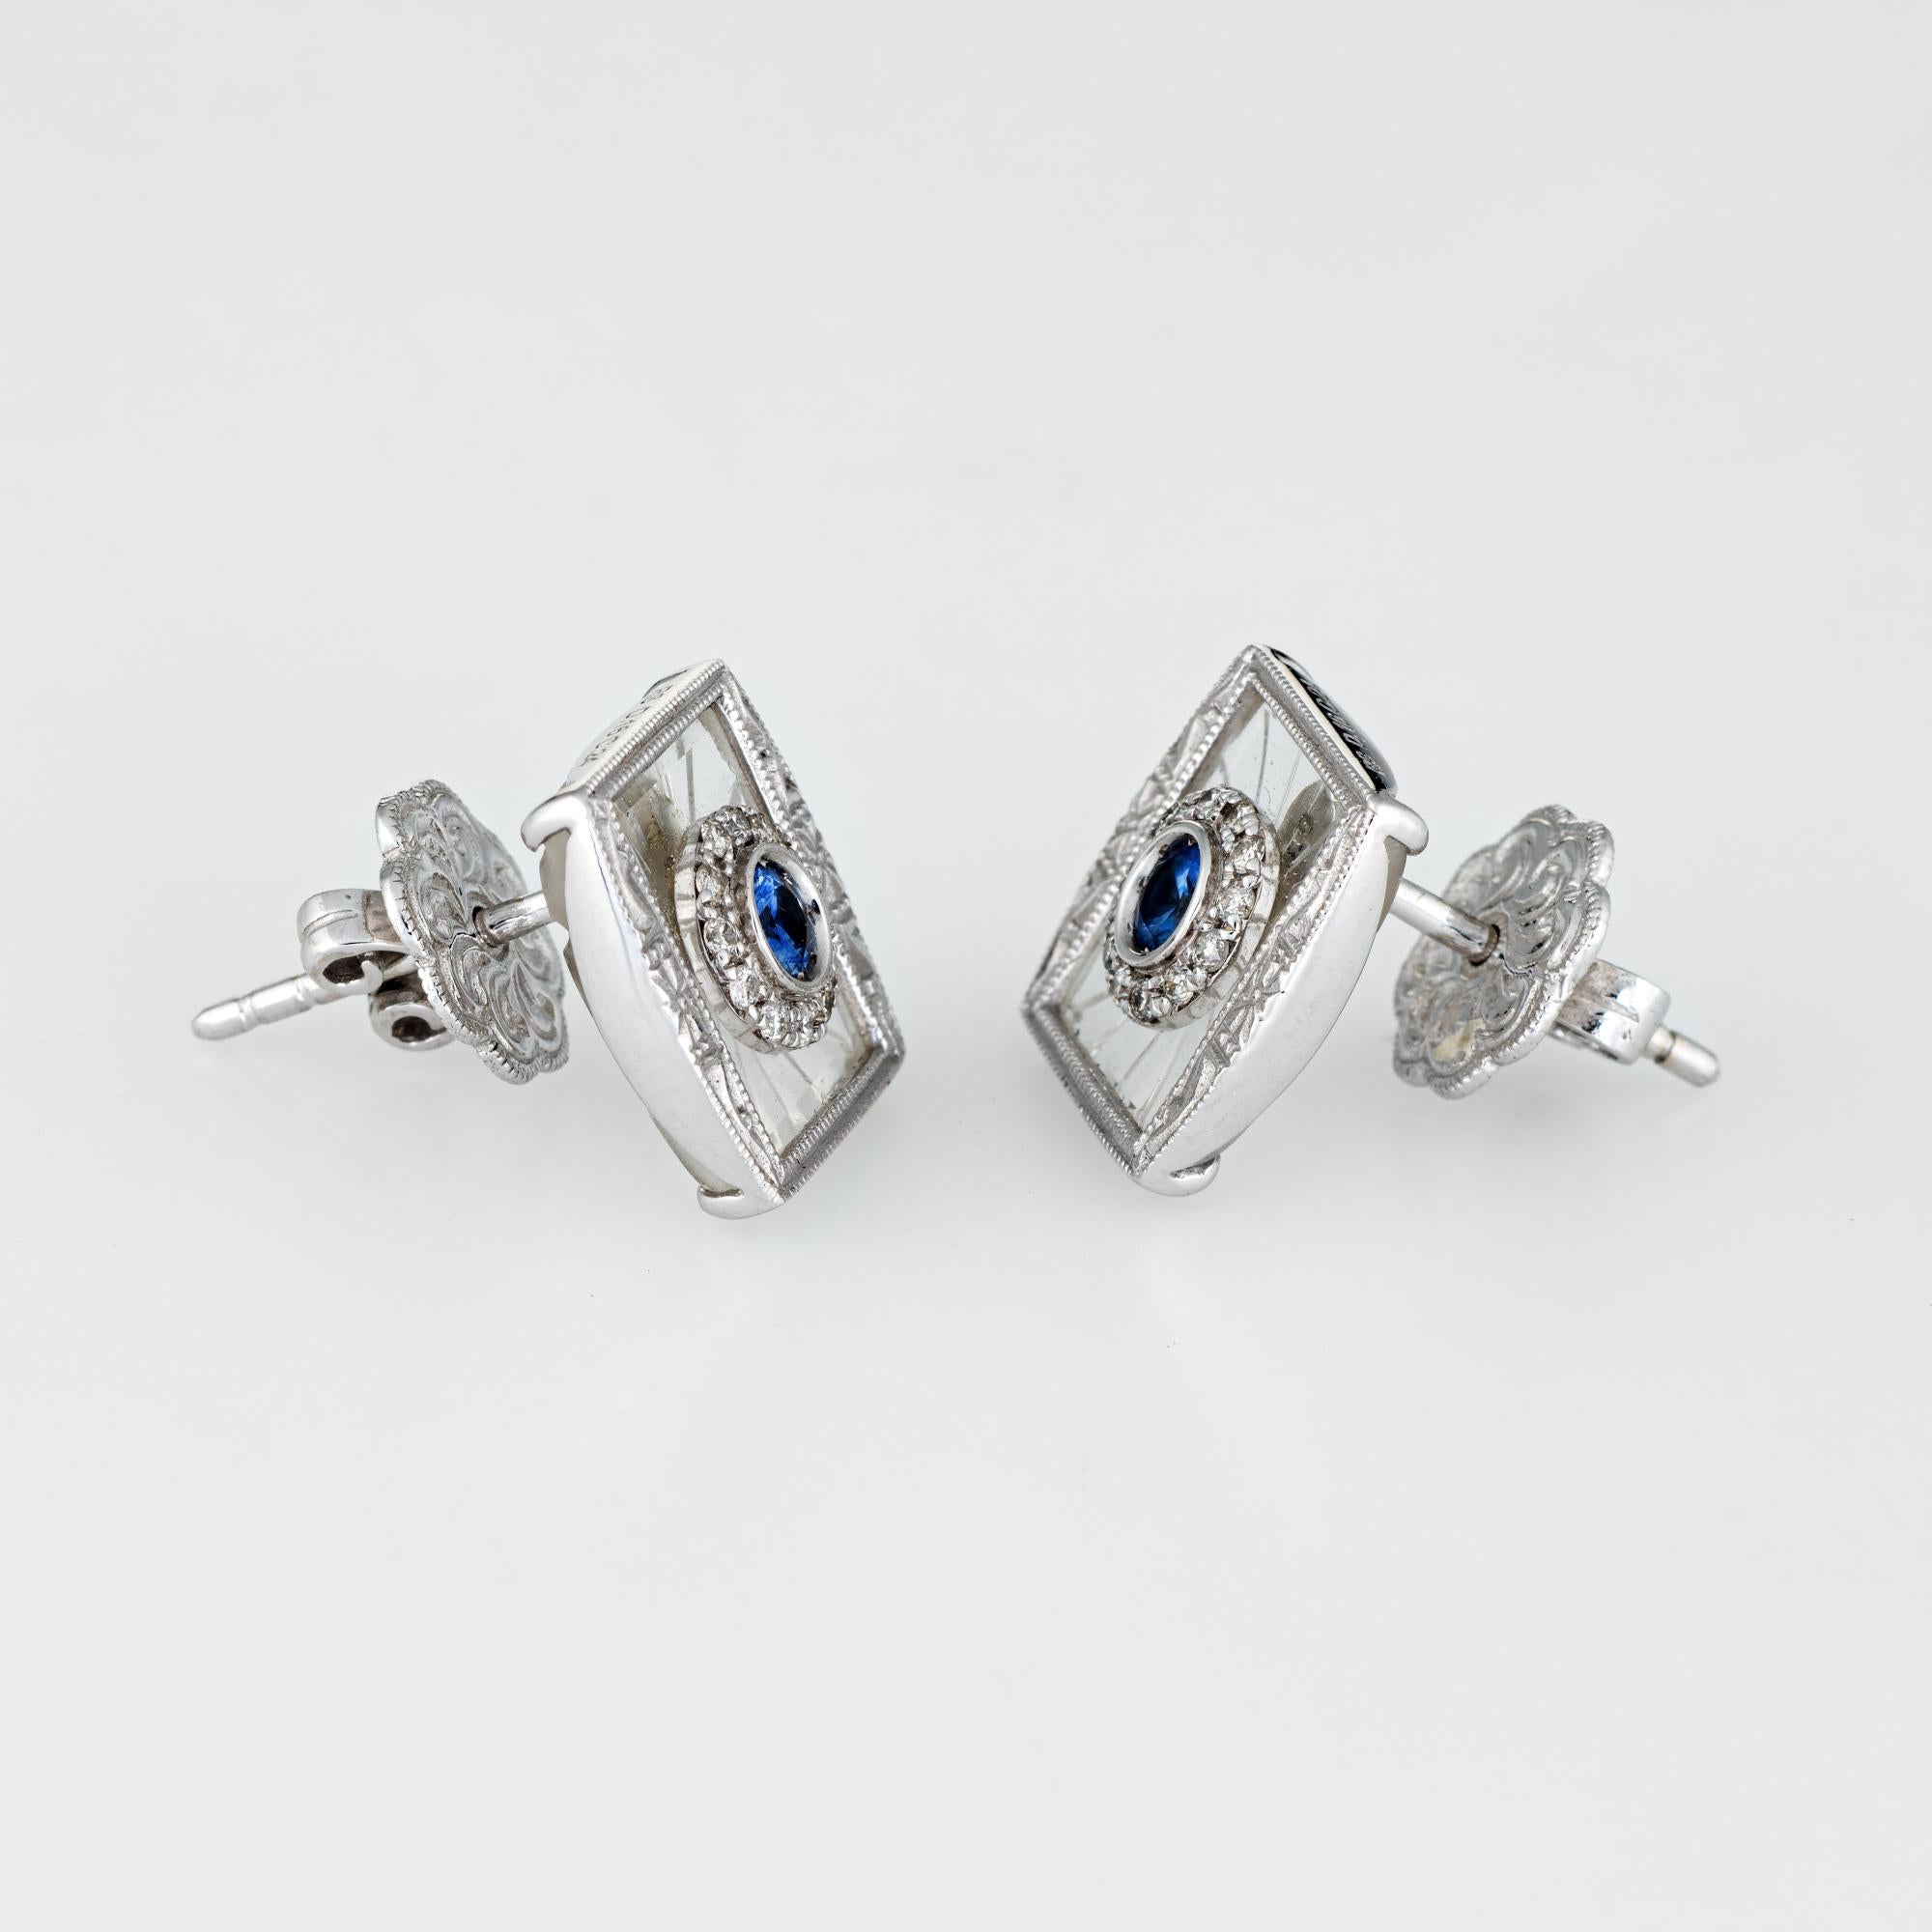 Elegant pair of estate sapphire & diamond square stud earrings crafted in 14k white gold. 

Diamonds total 0.16 carats (estimated at G-H color and VS2-SI1 clarity), accented with 0.24 carats of blue sapphires. The diamonds and sapphires are set into